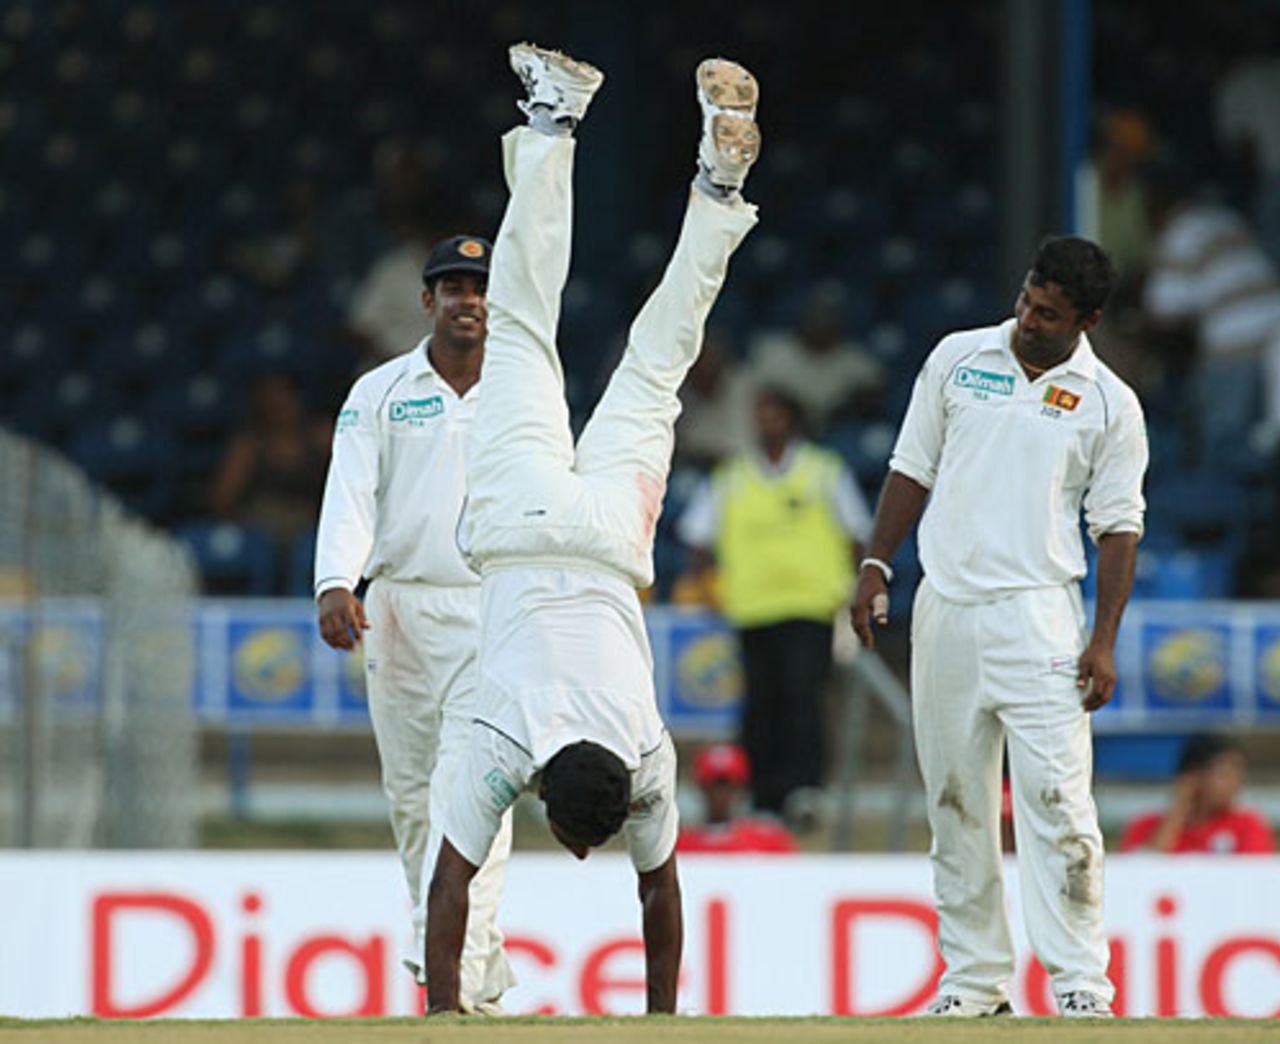 My new run-up: Ishara Amerasinghe does hand-stands, West Indies v Sri Lanka, 2nd Test, Trinidad, 2nd day, April 4, 2008 